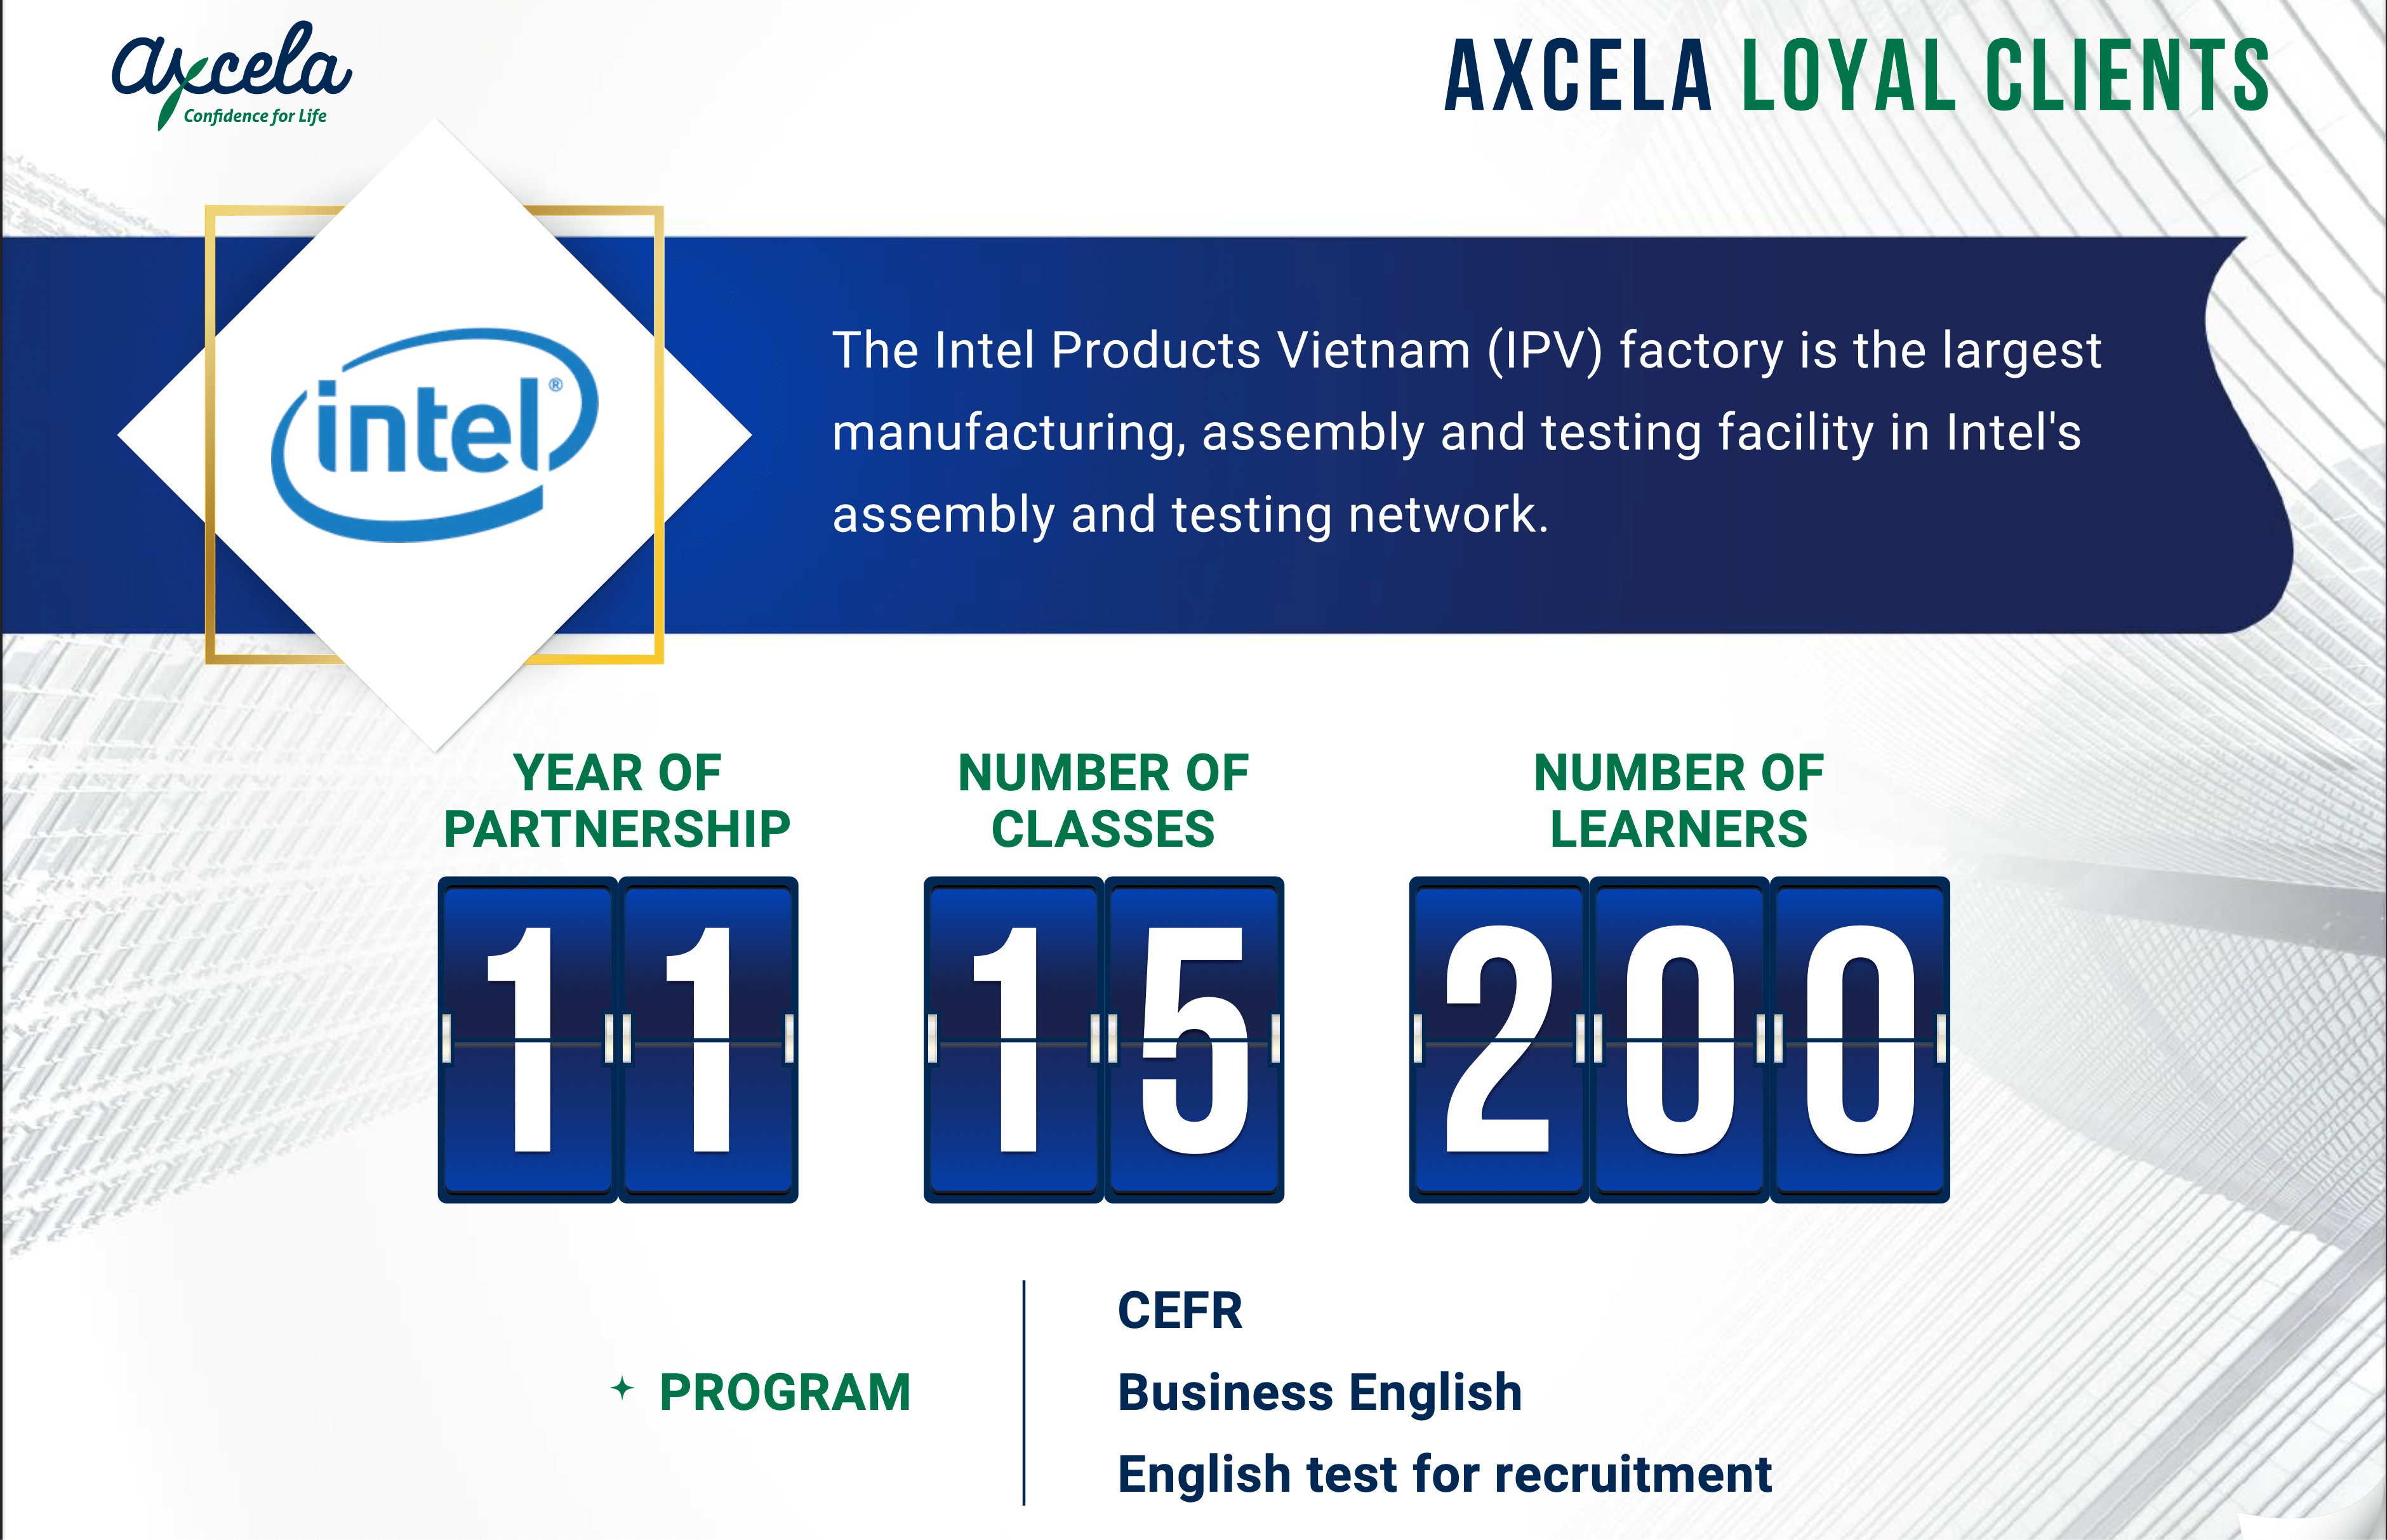 Continuous partner of Axcela for 11 years